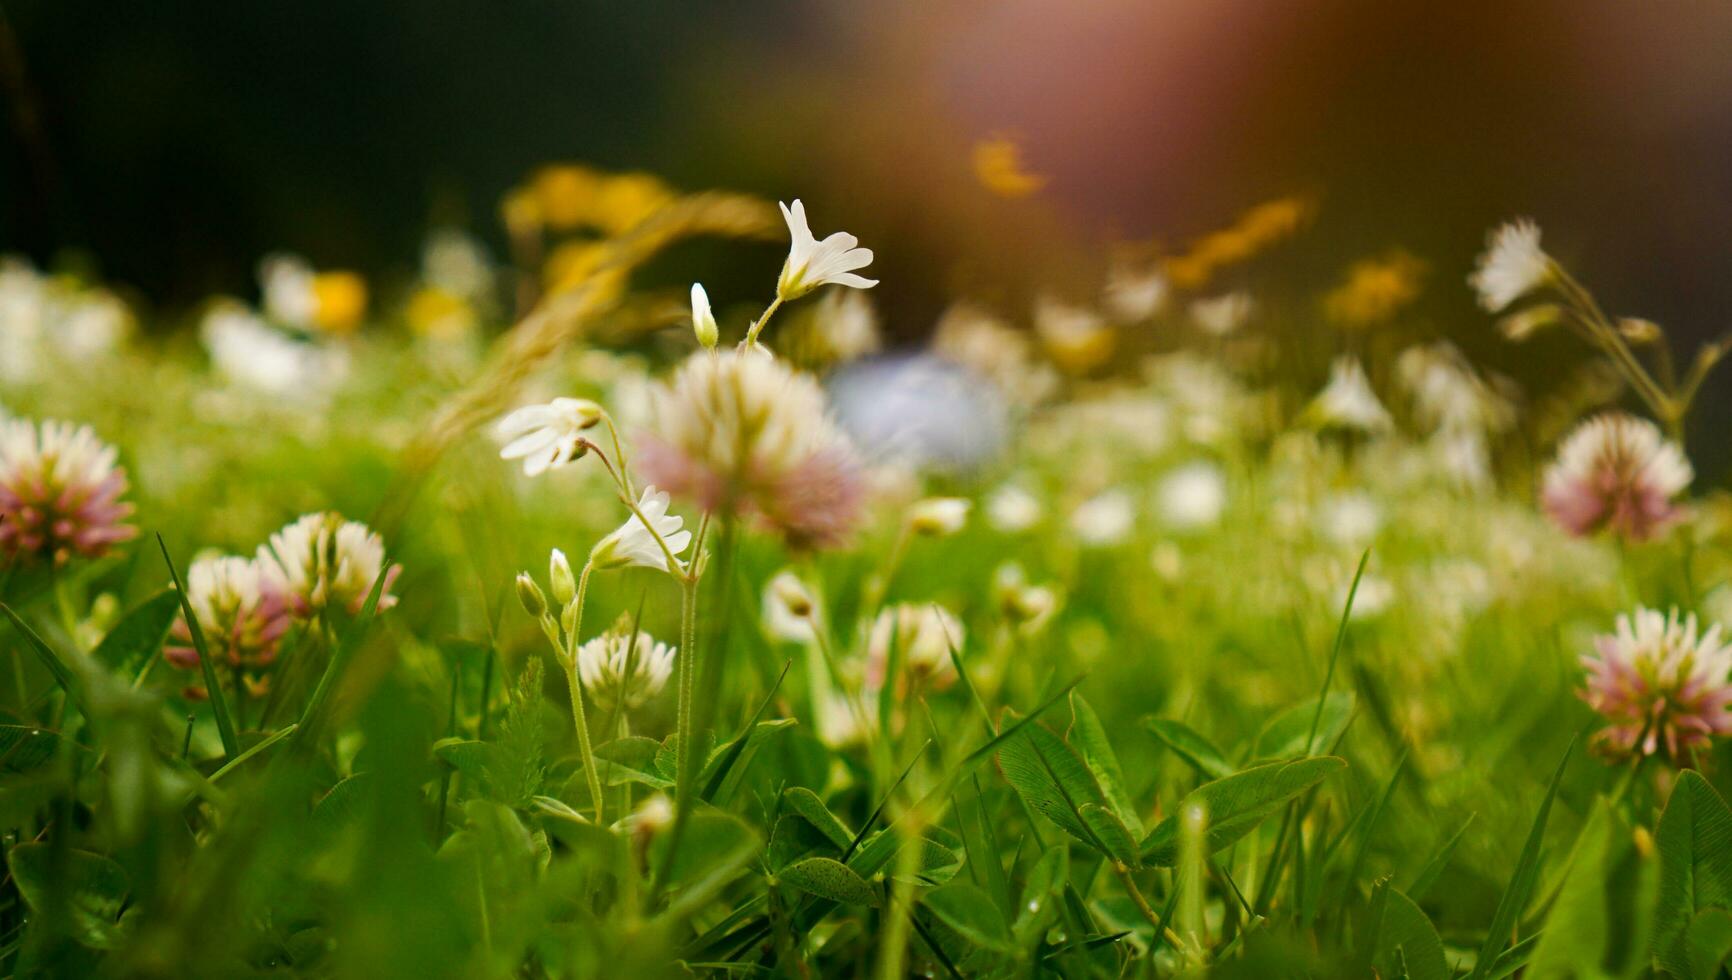 Flower meadow. Blurred spring background. Bright colors, summer mood photo